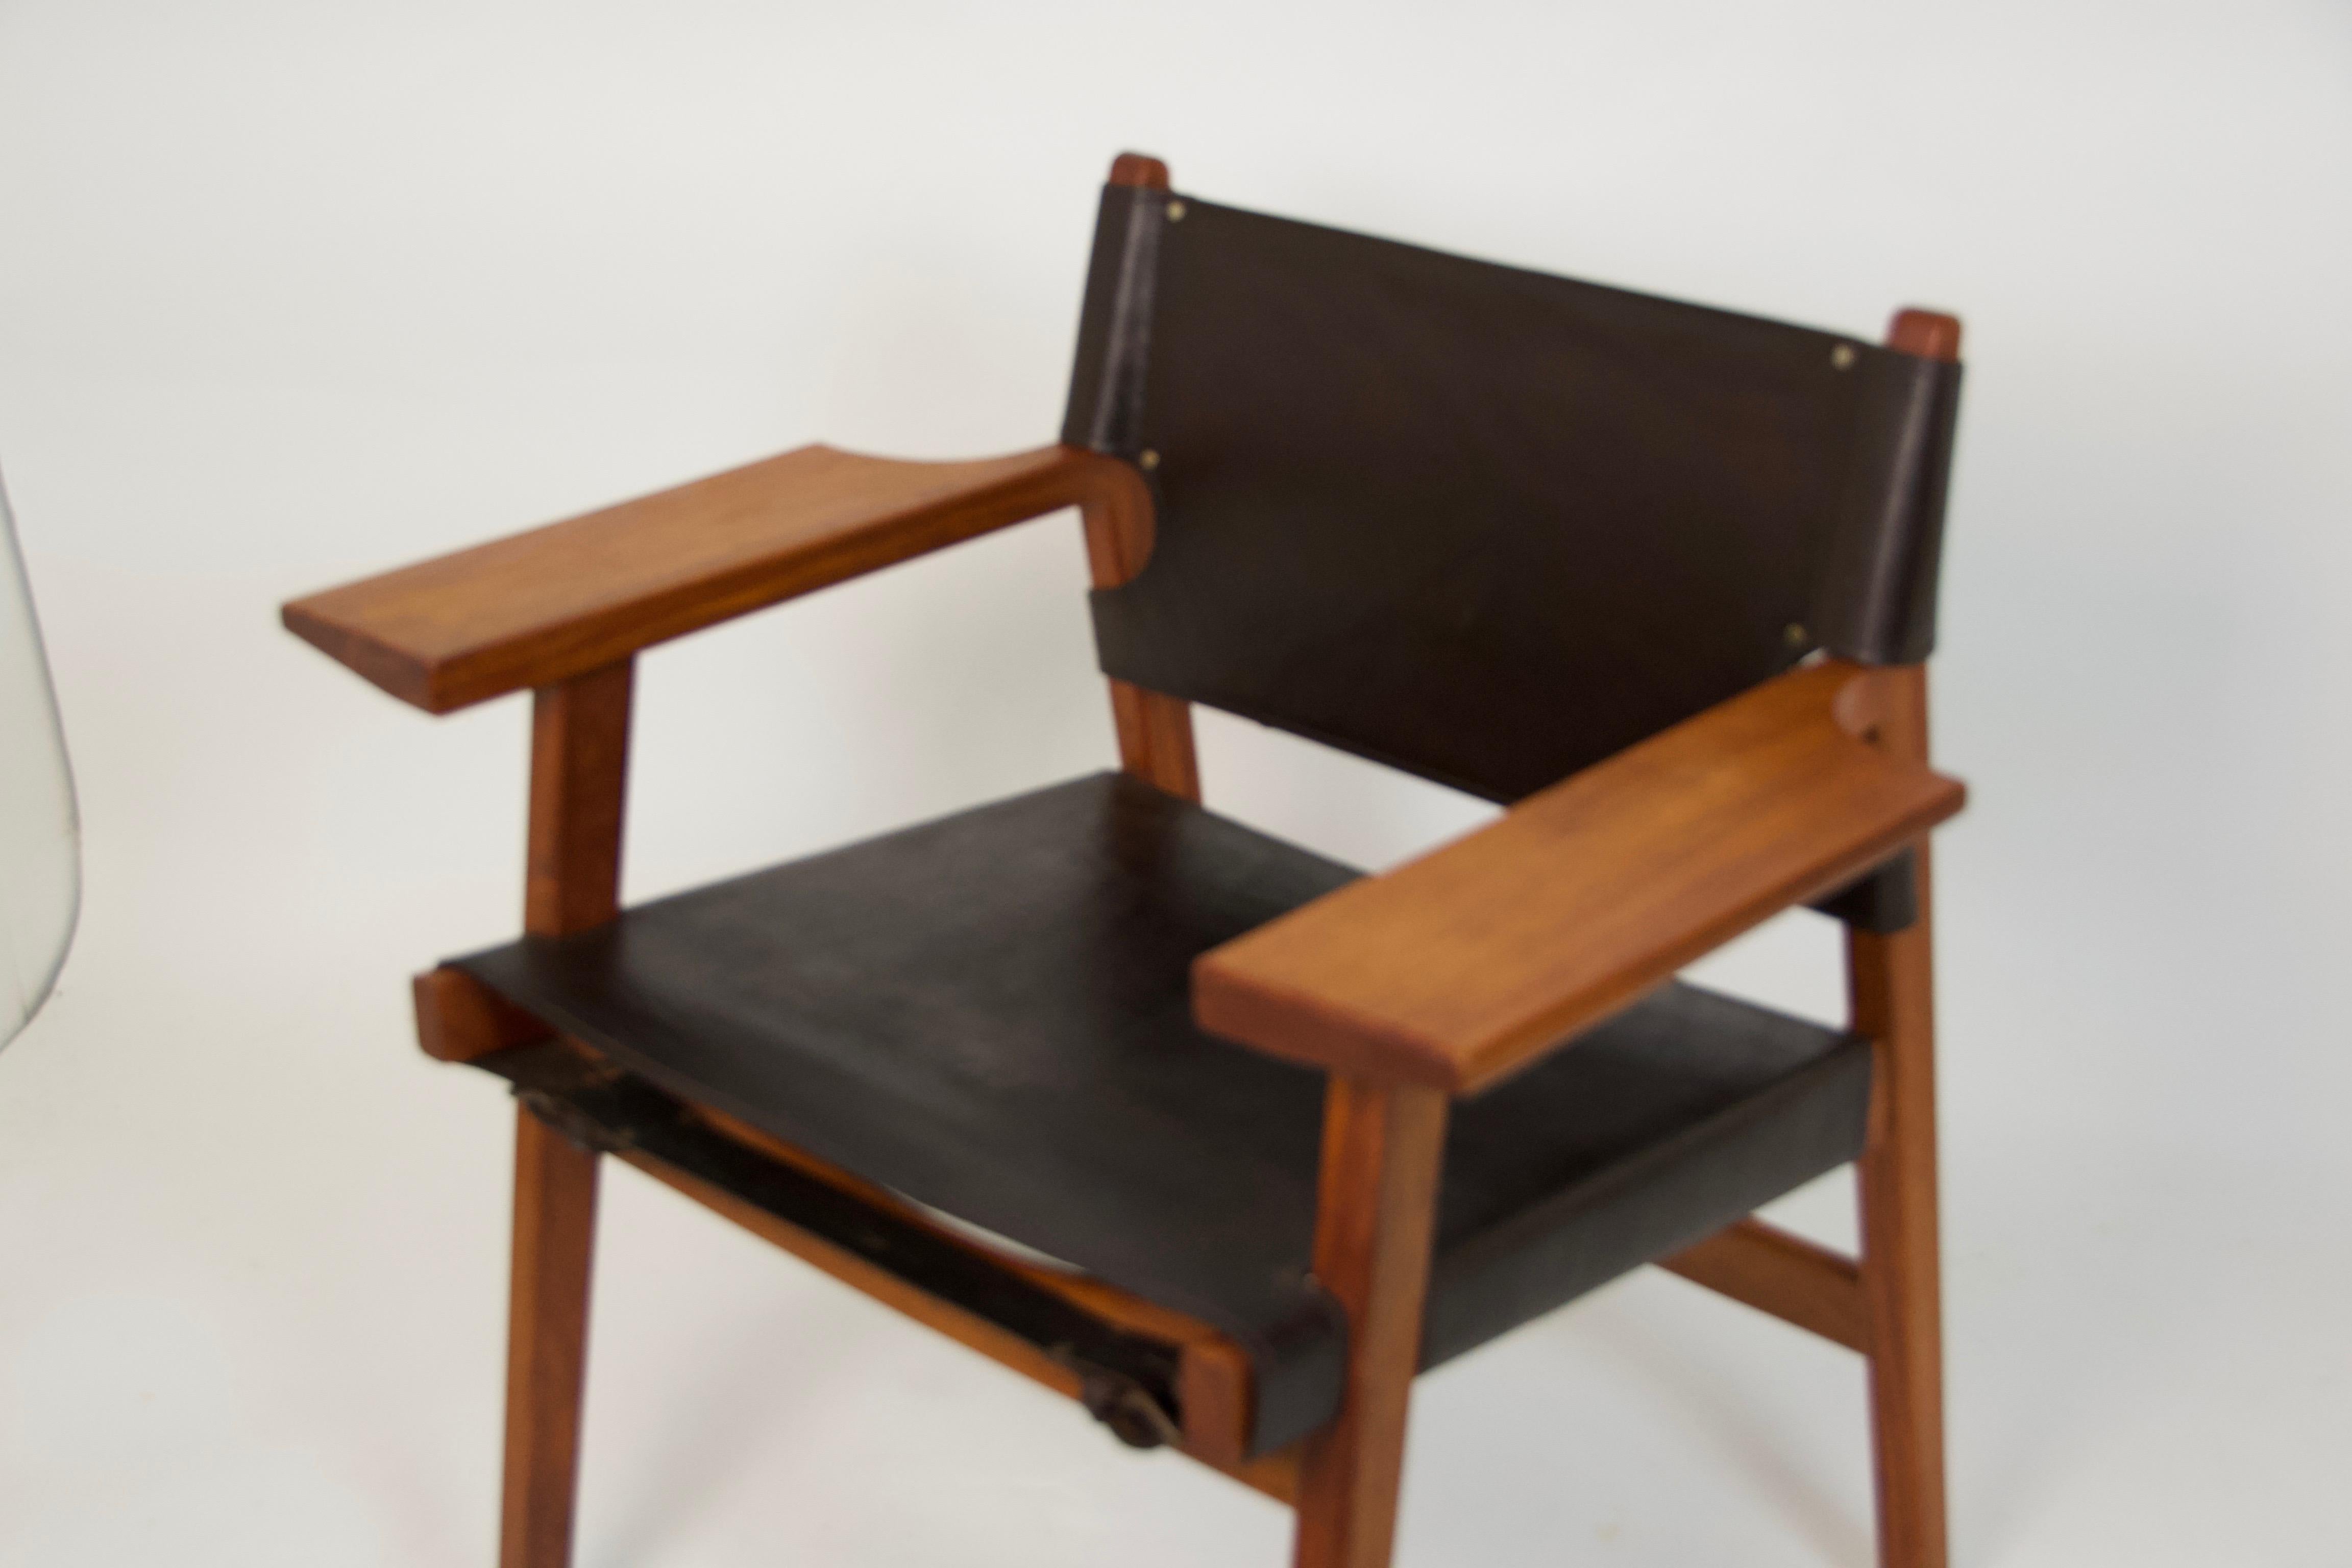 Spanish Chair Borge Mogensen Style Teak and Leather, circa 1960 For Sale 2